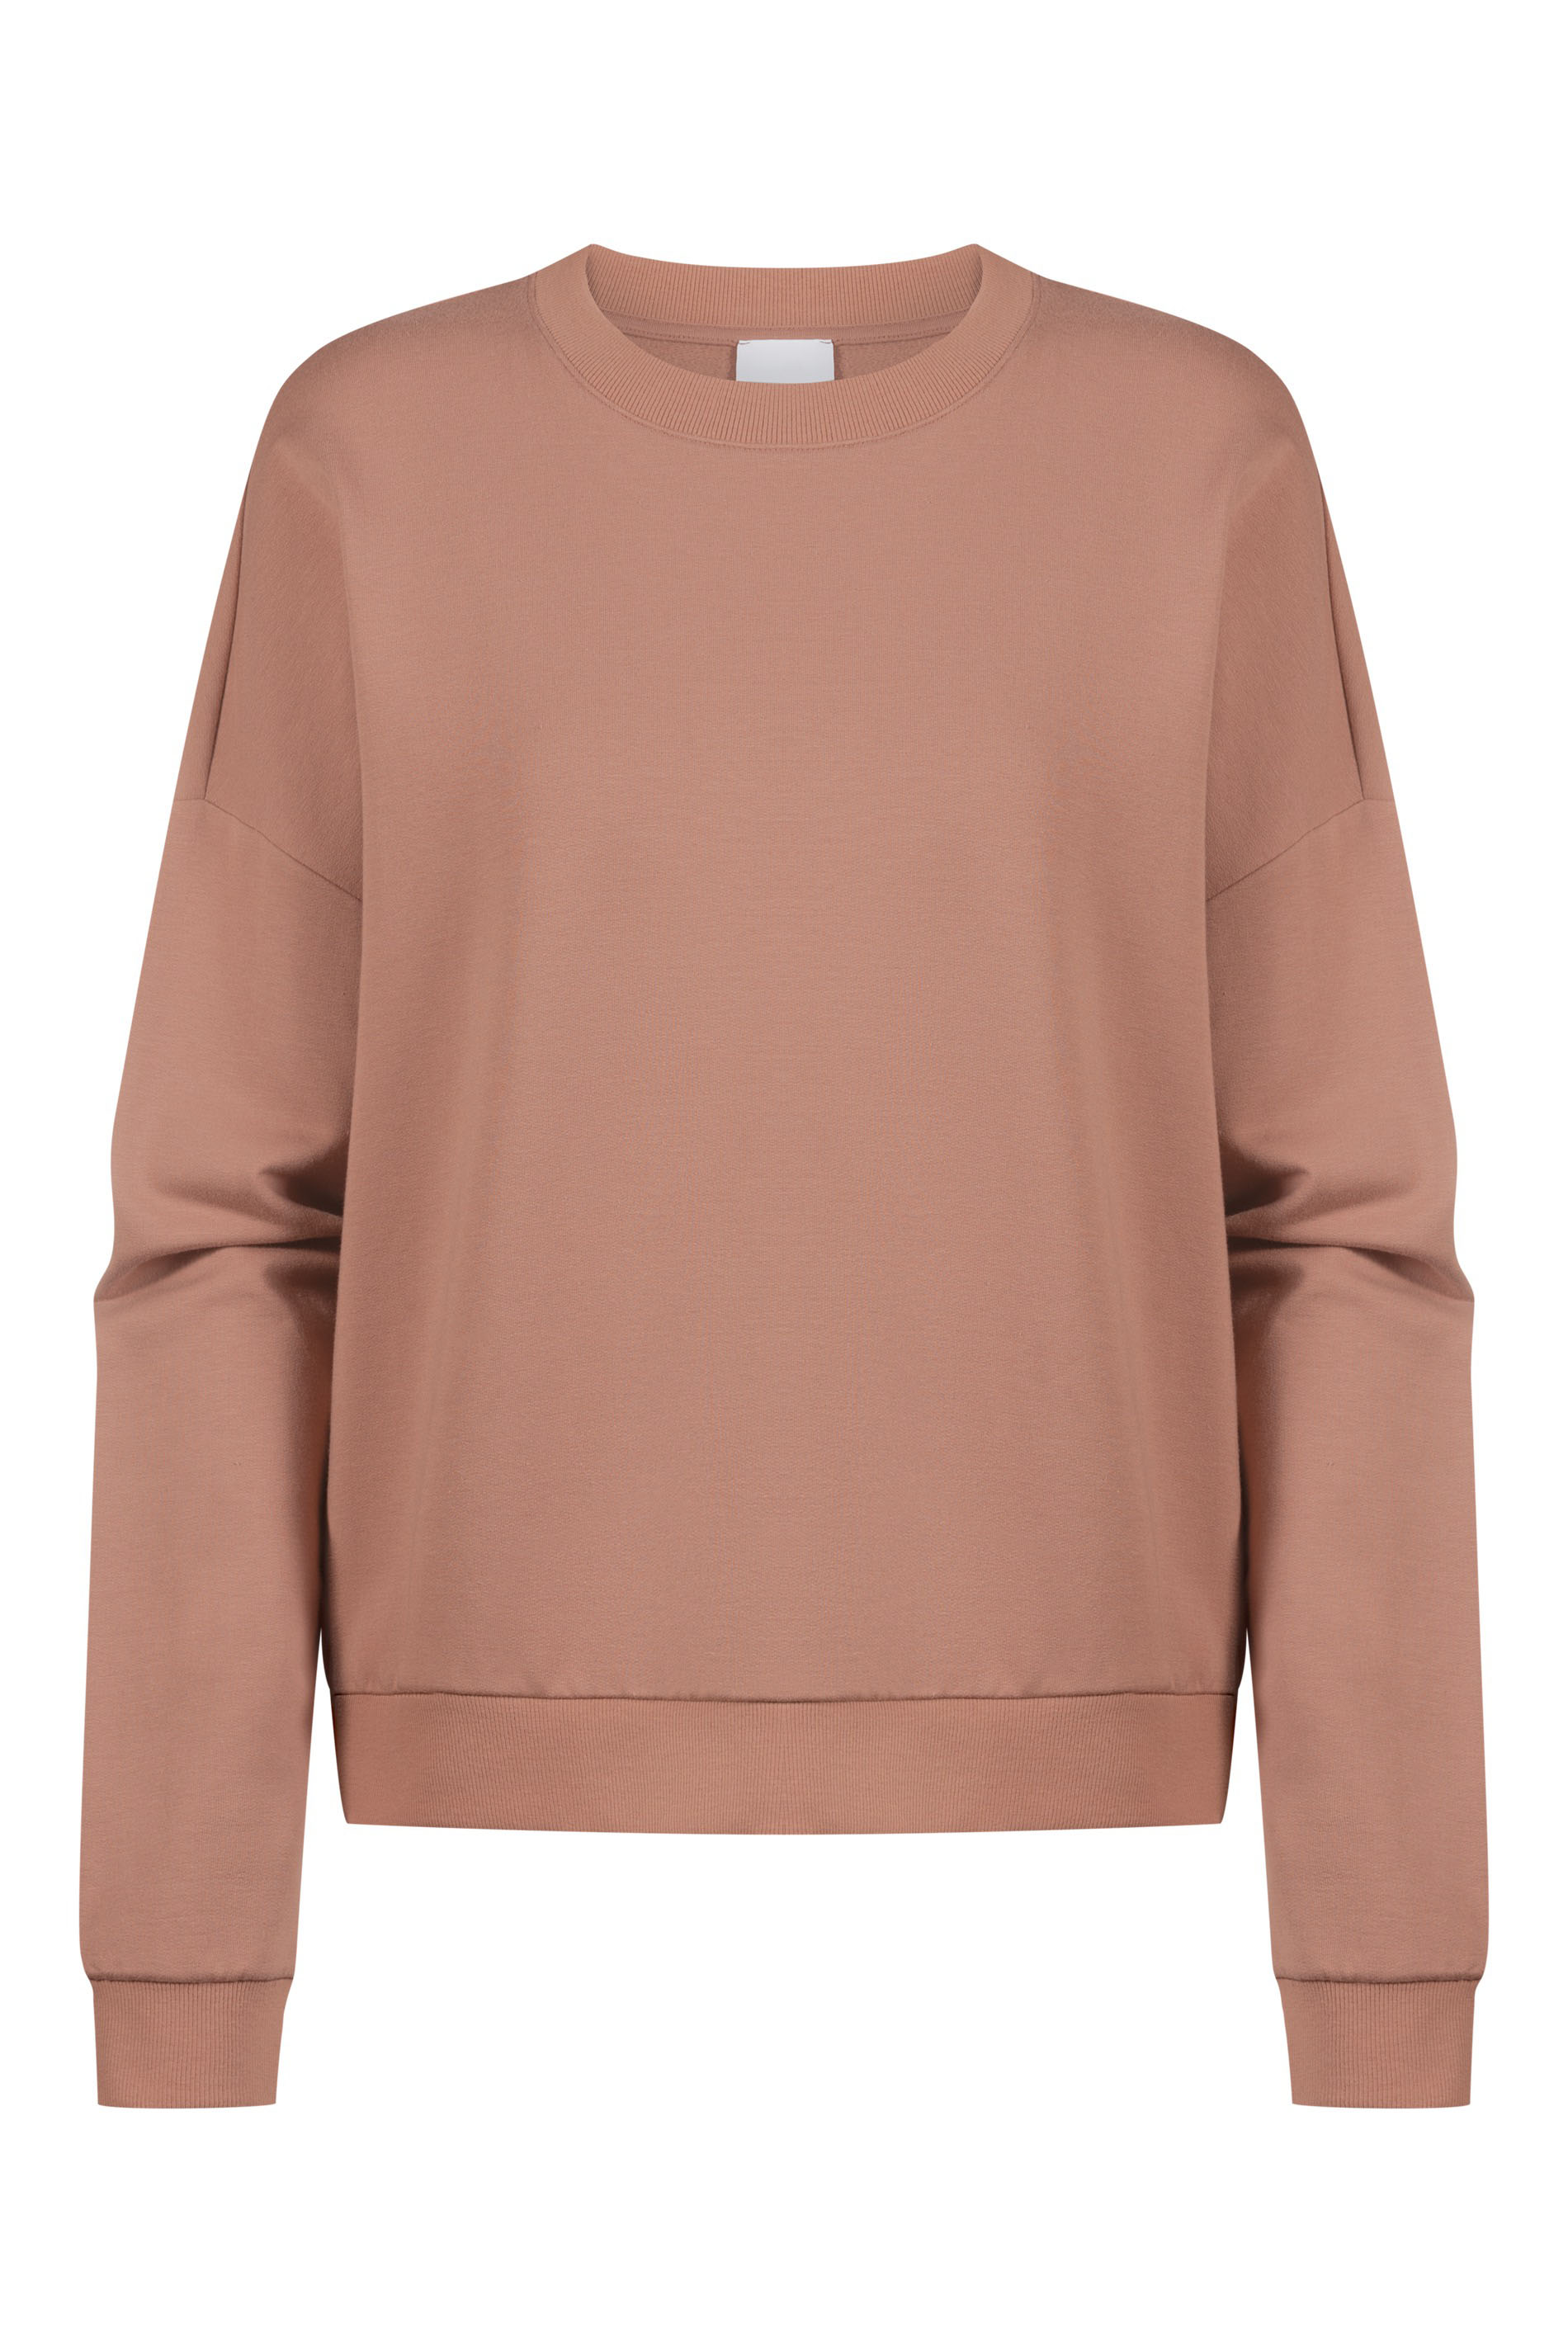 Sweater Serie Rose Uitknippen | mey®